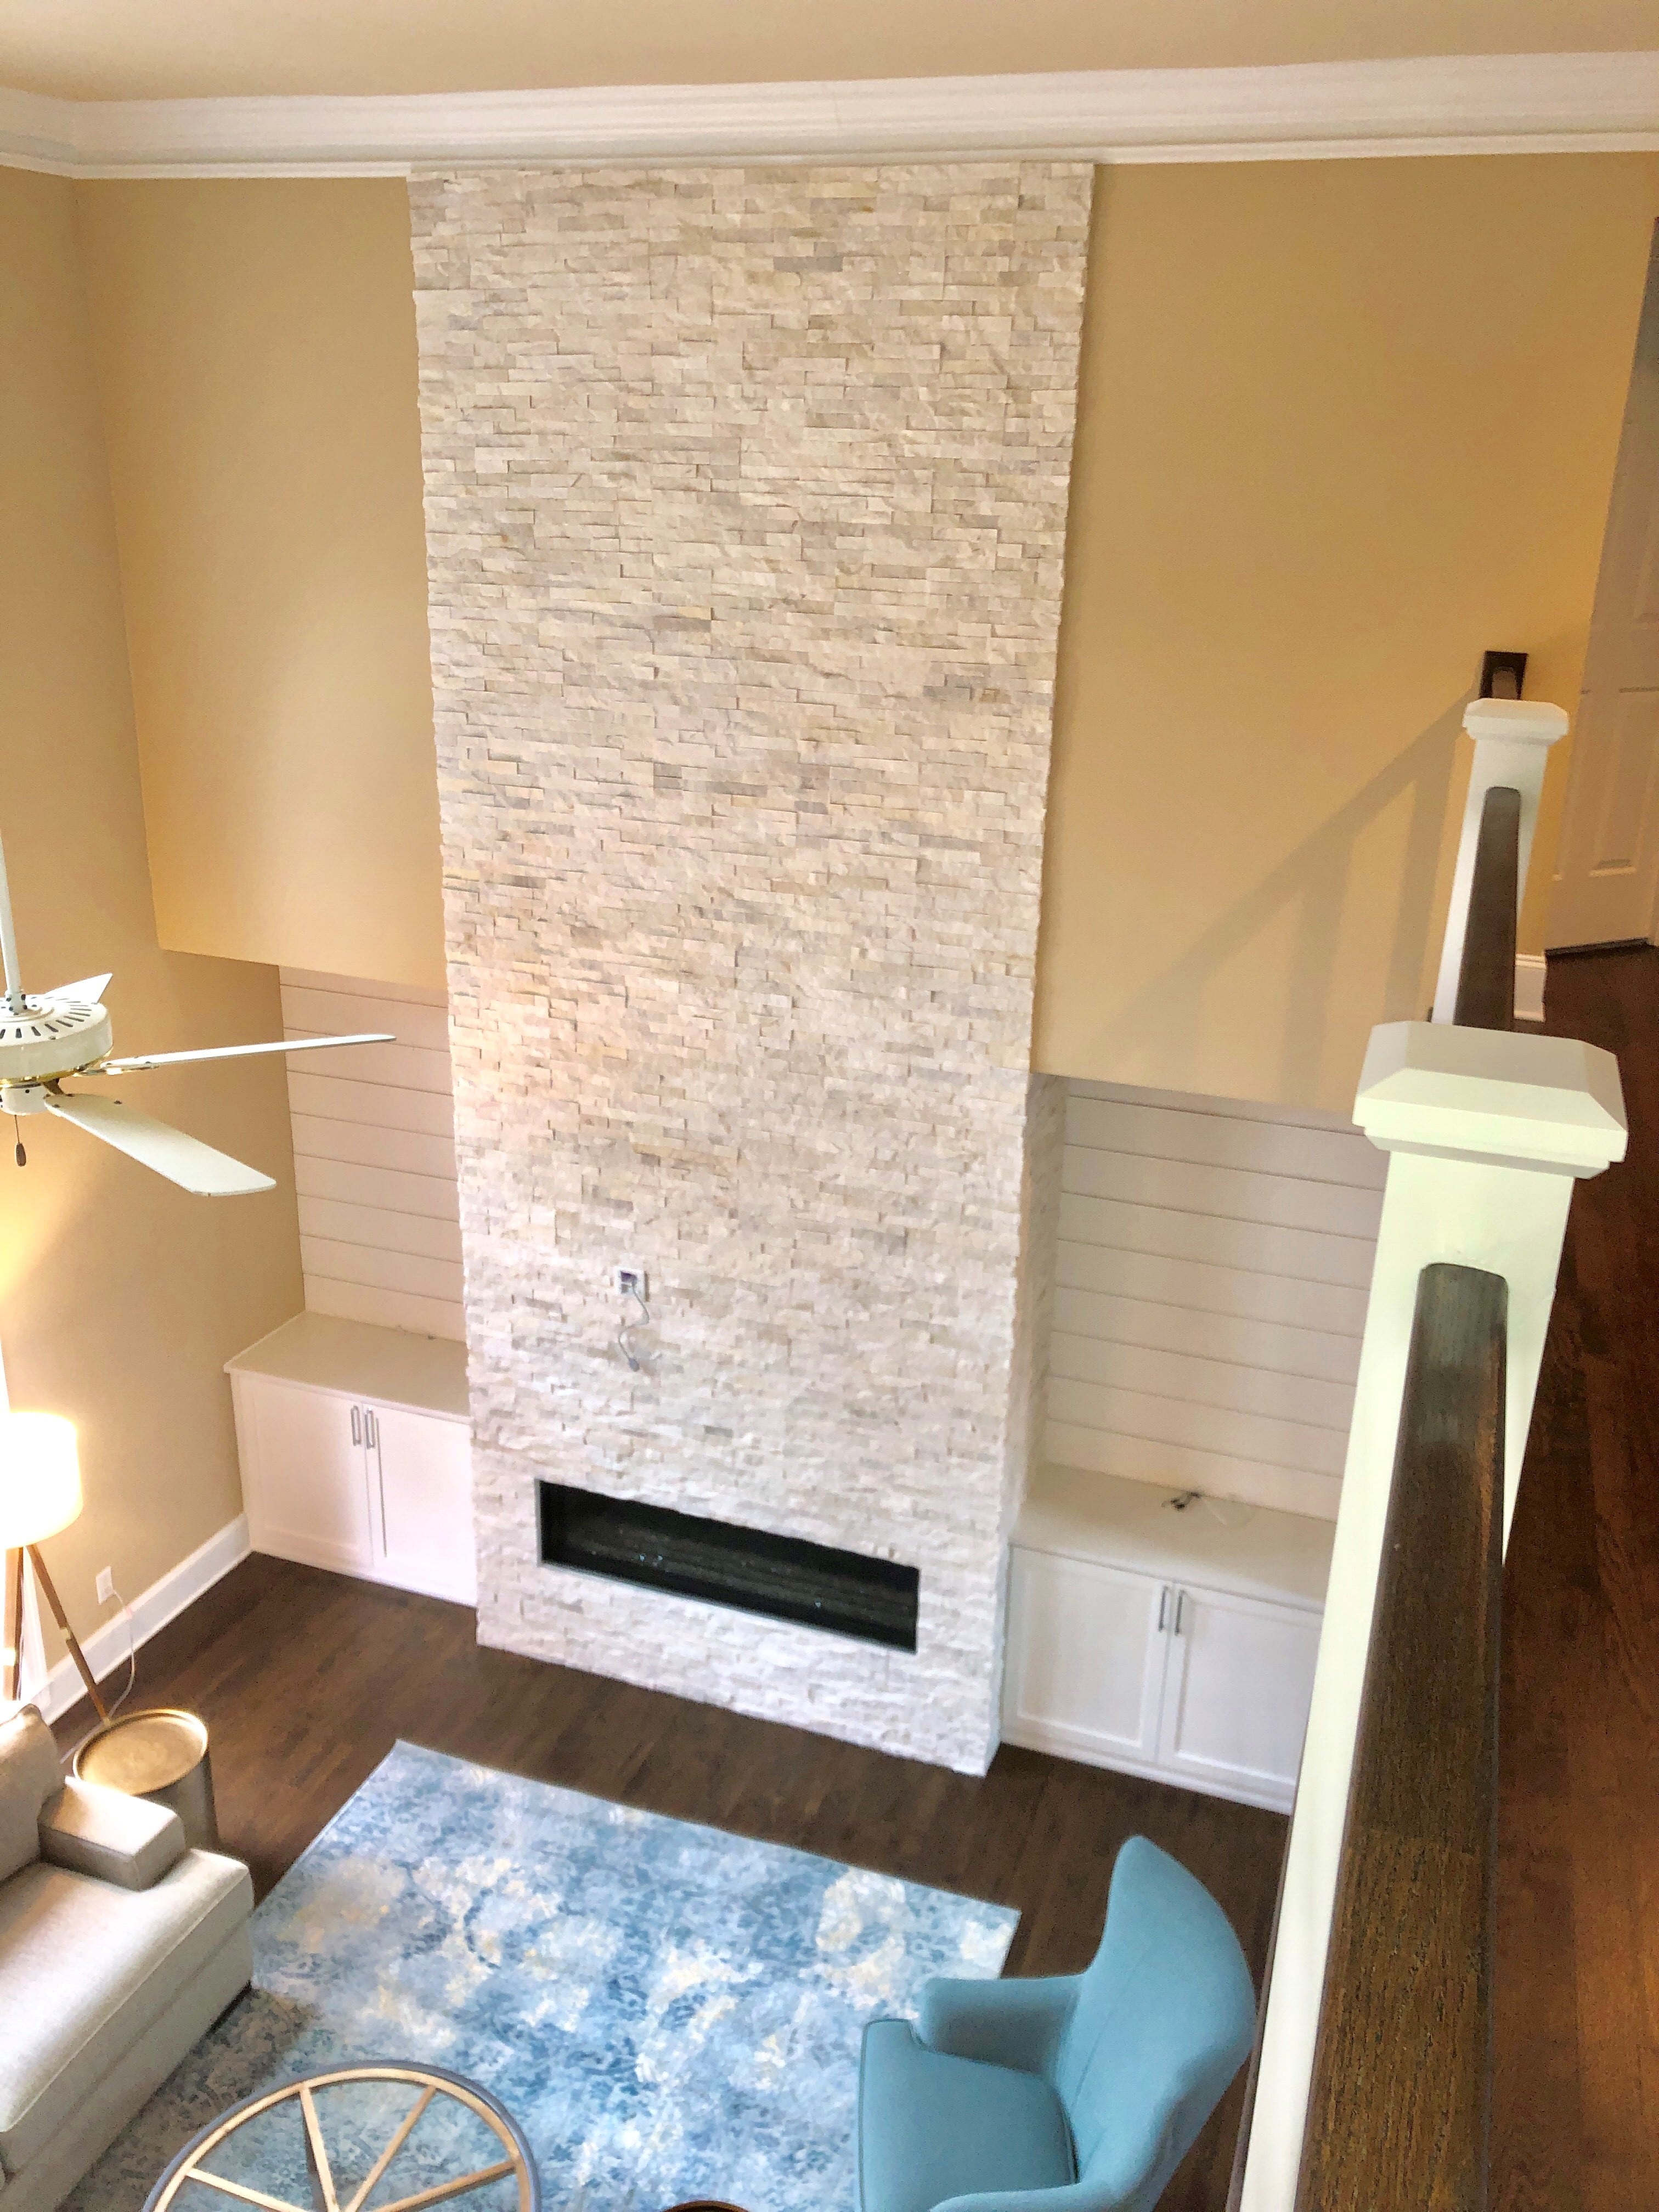 Norstone White Rock Panels used on a two story residential fireplace as seen from an upper stairway looking down